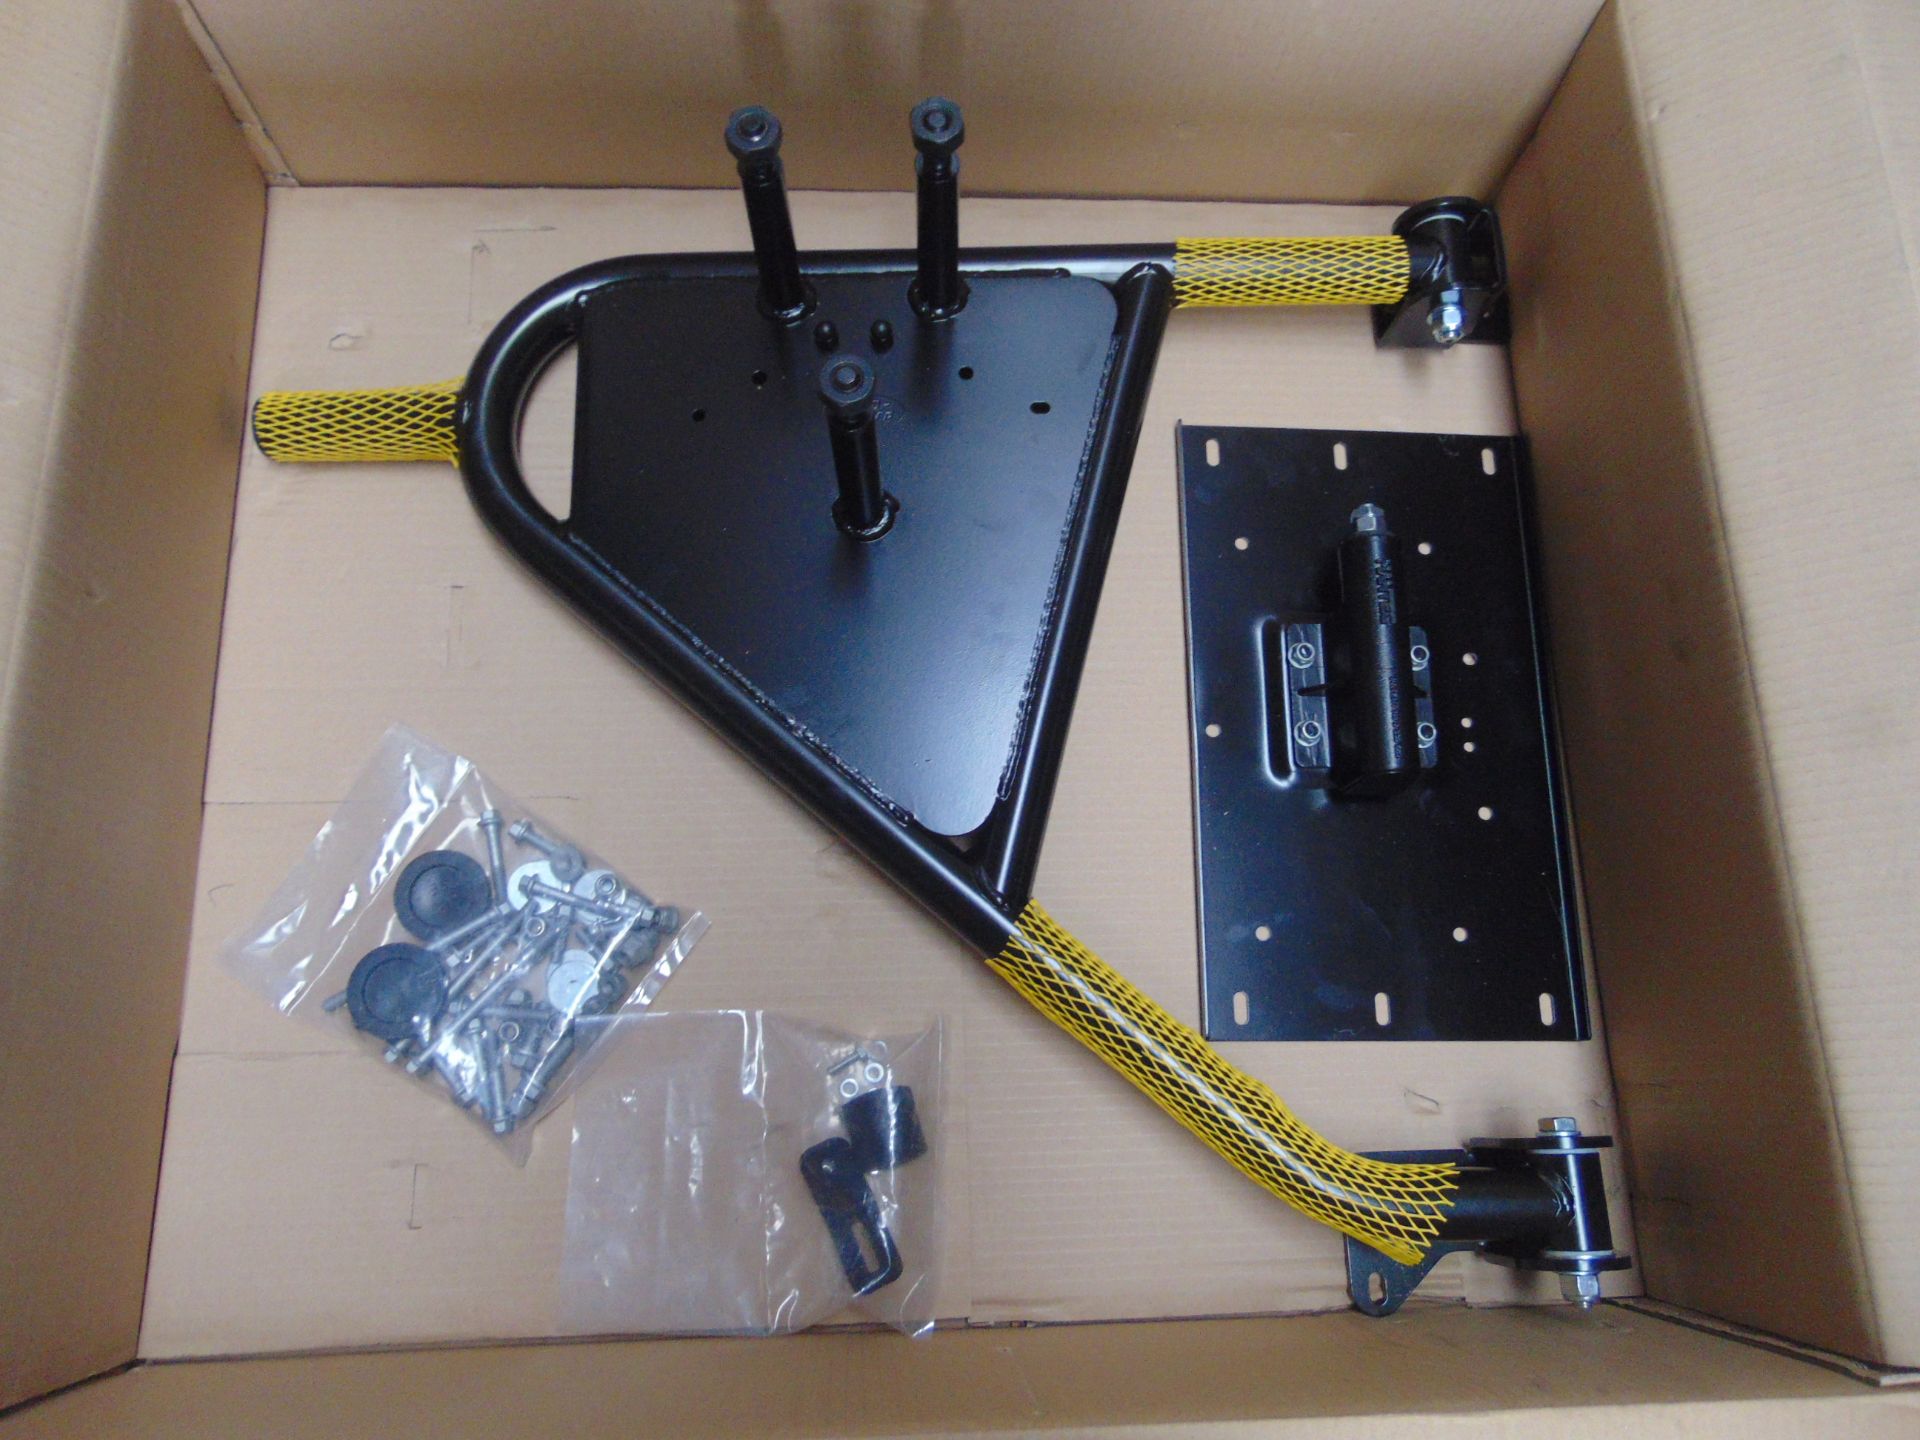 10 x Land Rover Defender Hard Top Swing Out Spare Wheel Carrier Kits P/No VPLDR0130 - Image 2 of 8